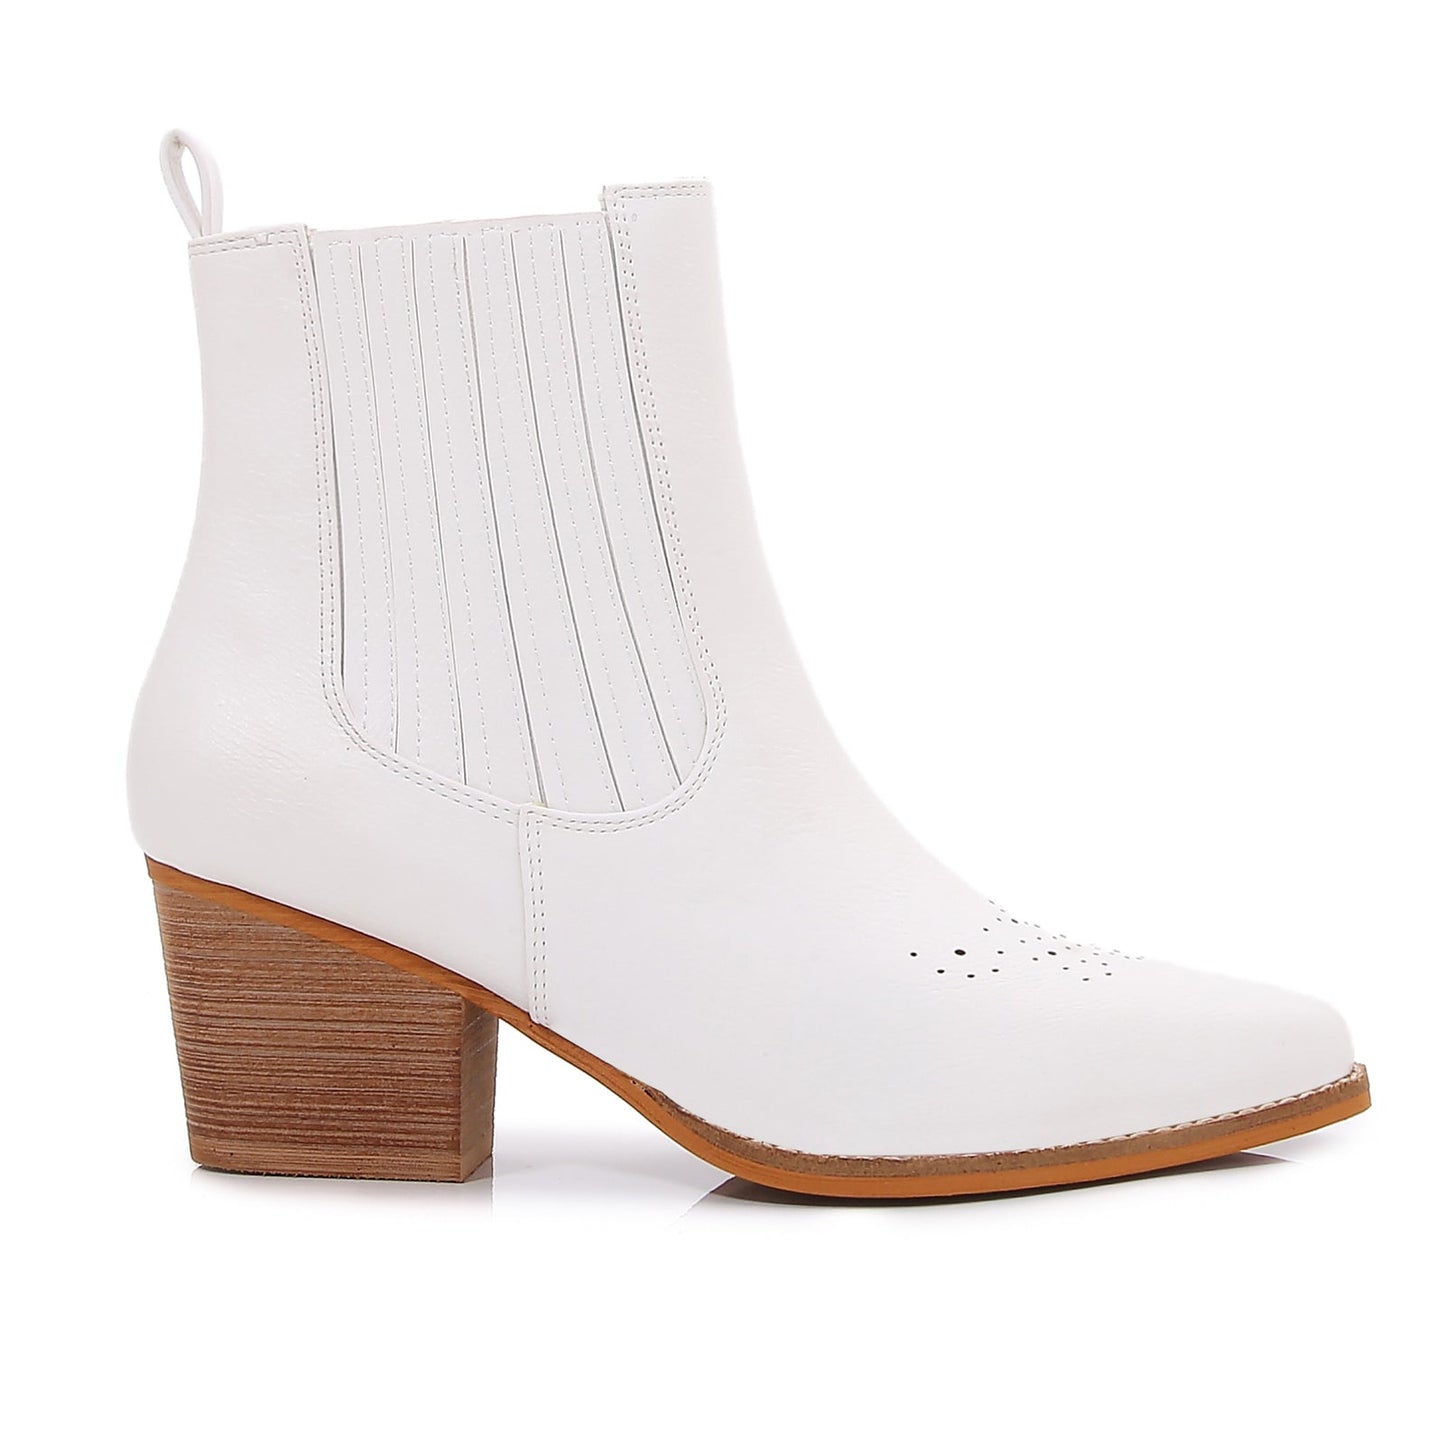 Women PU Leather Perforated Front Stacked Heel Ankle Boots with Elastic Side Gussets